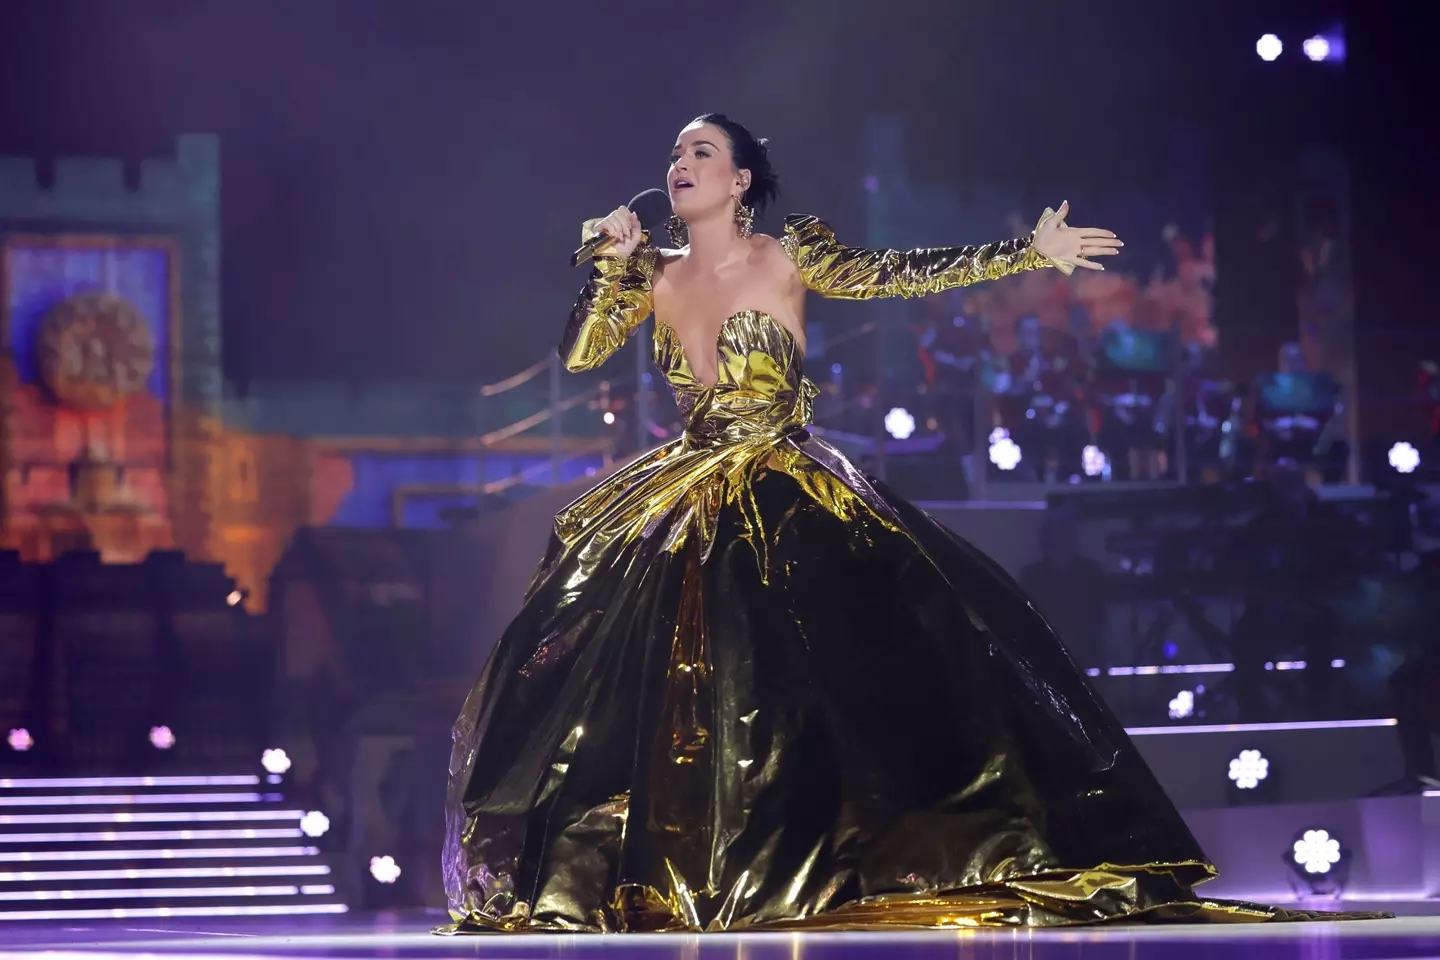 Katy Perry was one of the coronation concert's headlining acts.